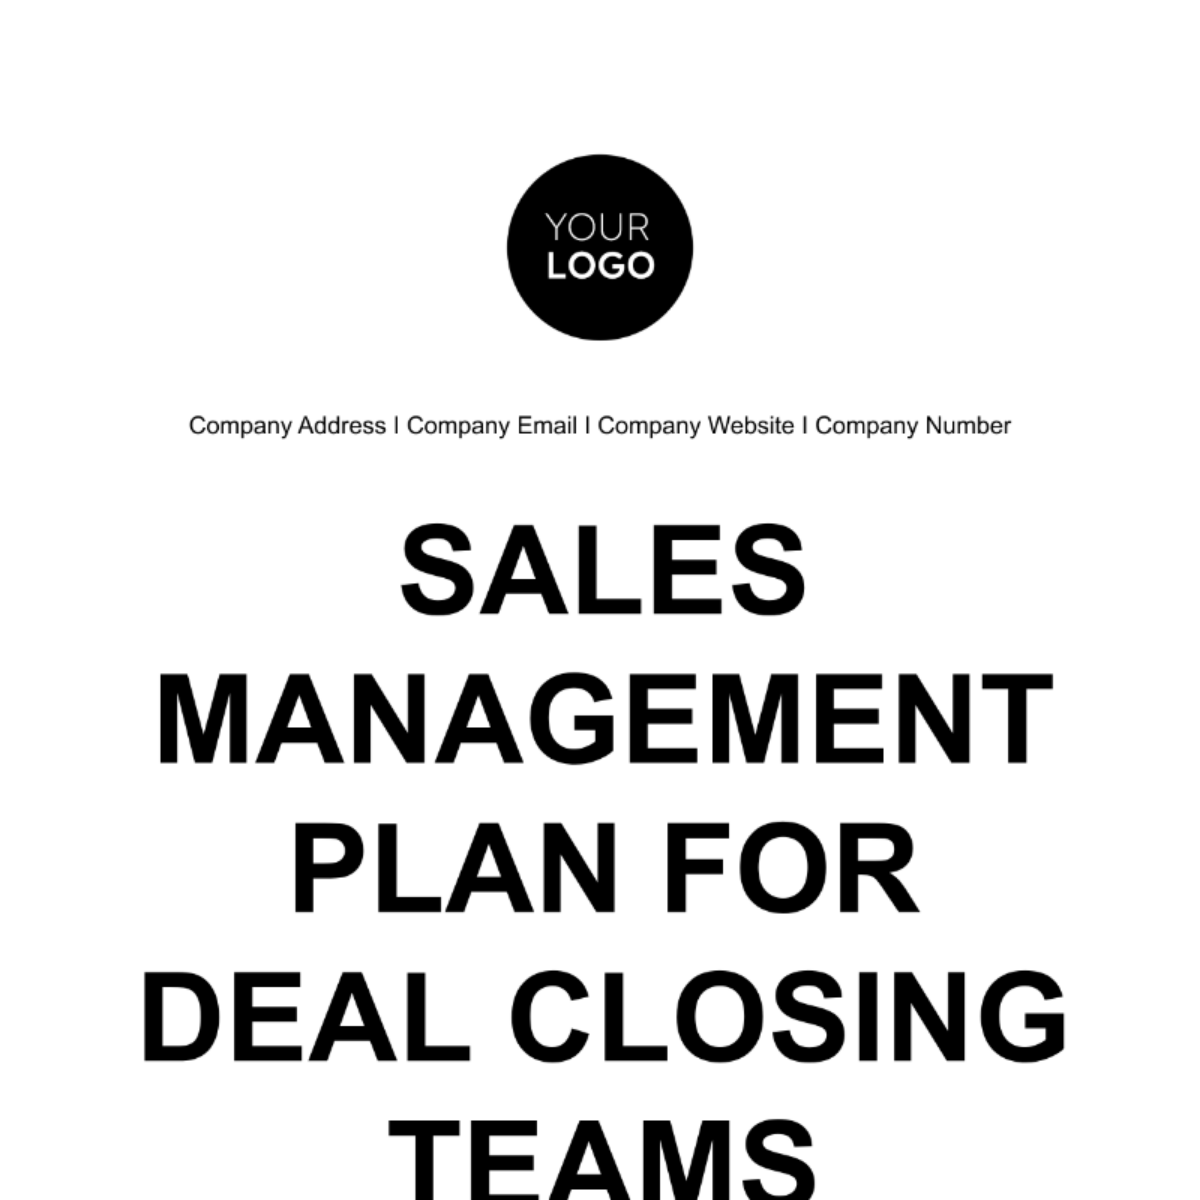 Free Sales Management Plan for Deal Closing Teams Template